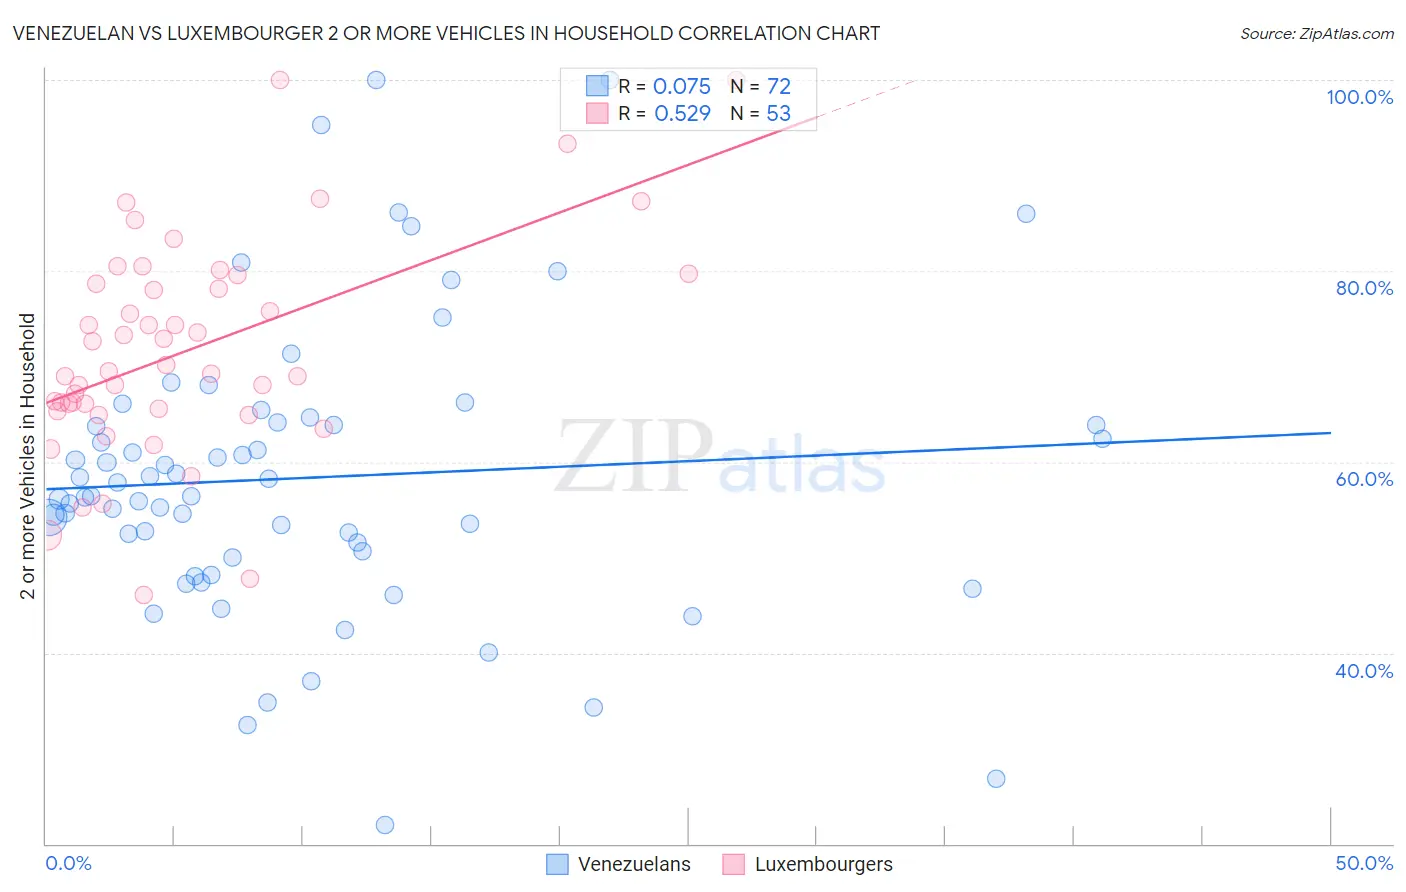 Venezuelan vs Luxembourger 2 or more Vehicles in Household